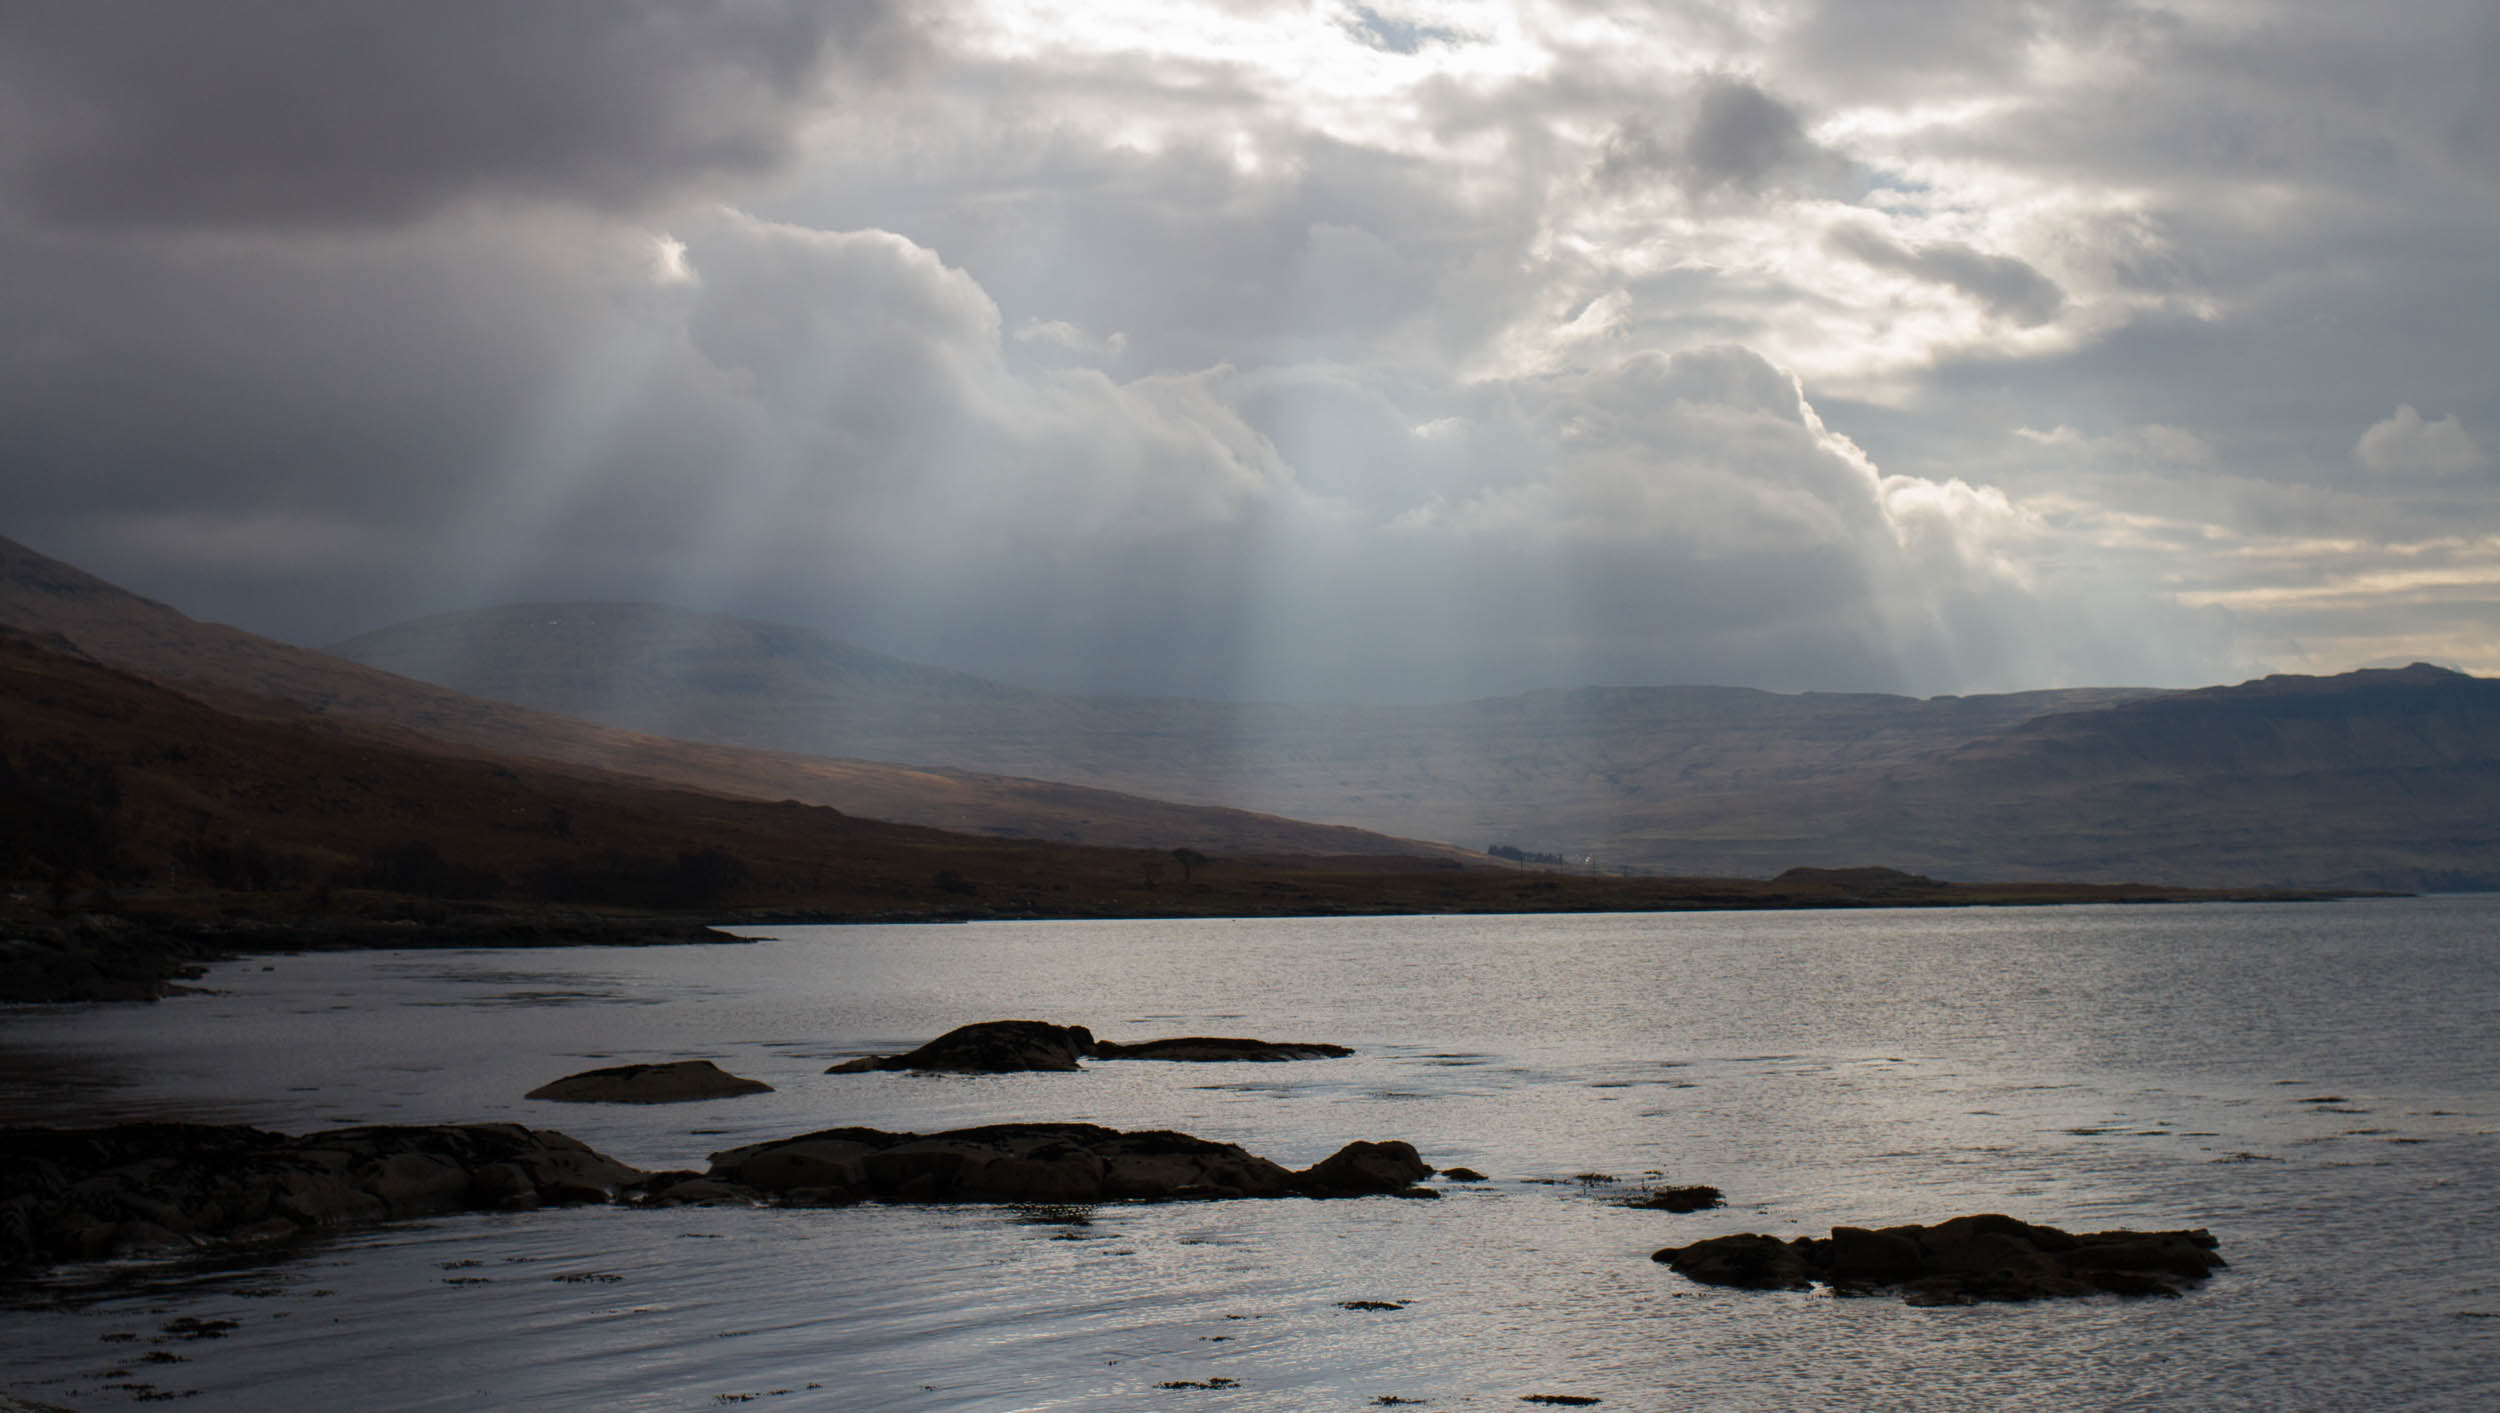 Moody clouds over Loch na Keal on the Isle of Mull, Scotland 